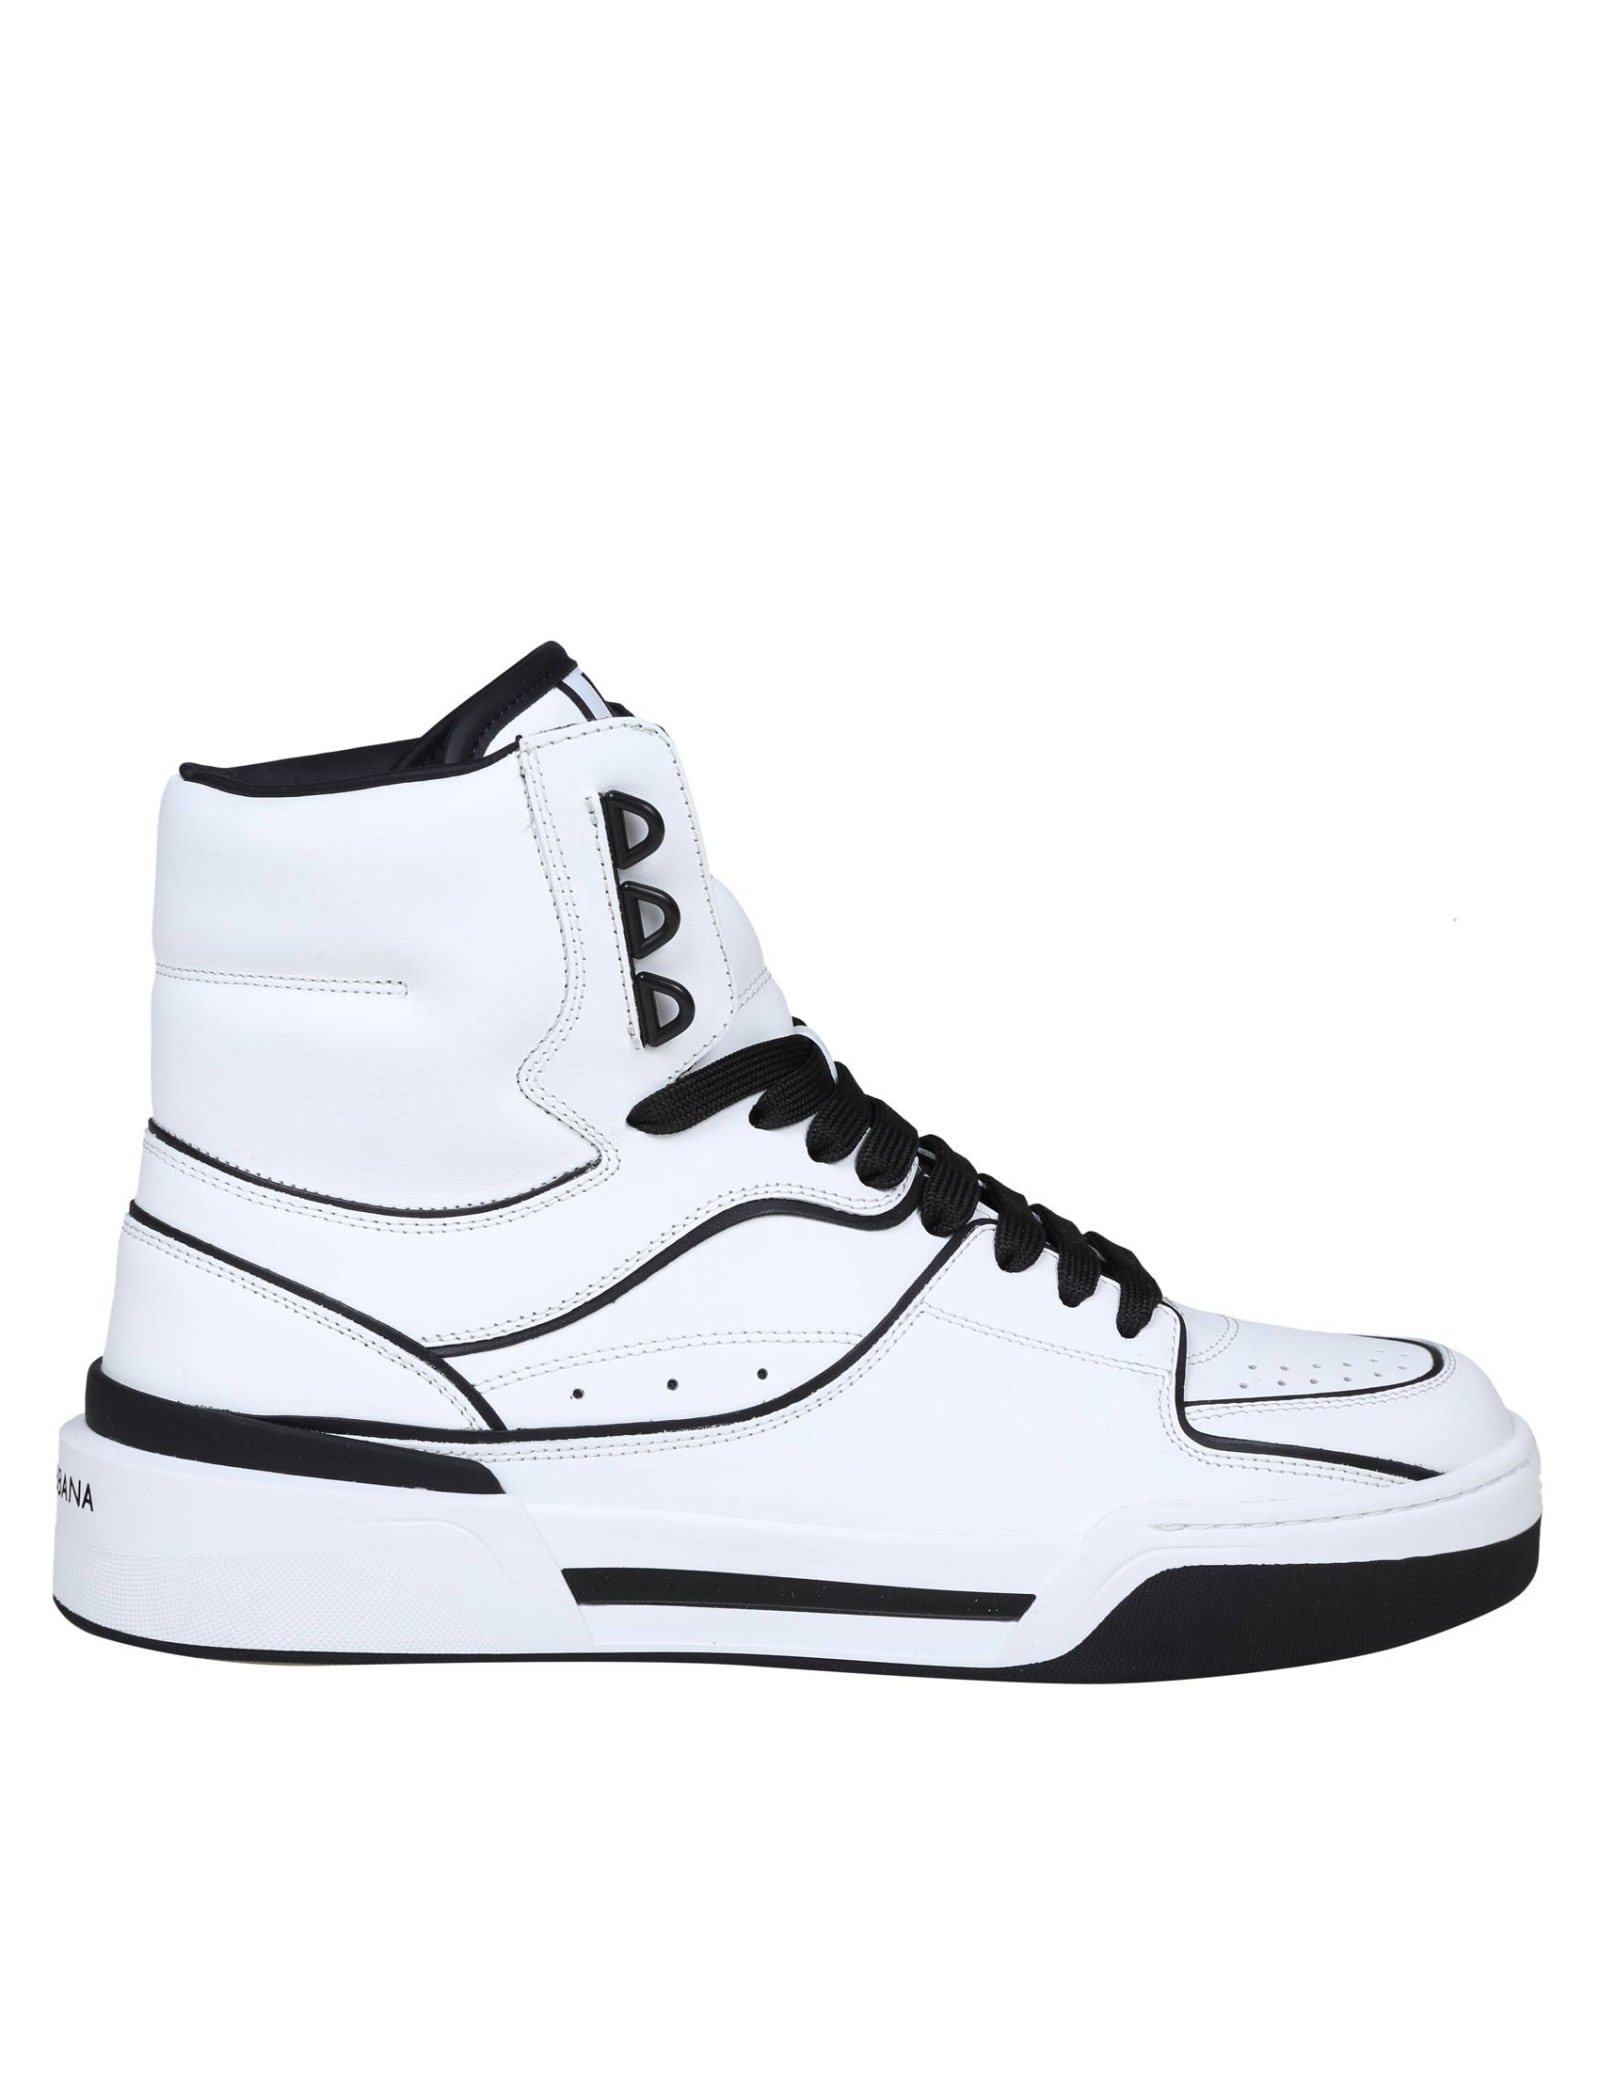 Dolce & Gabbana High Sneakers In Black And White Nappa